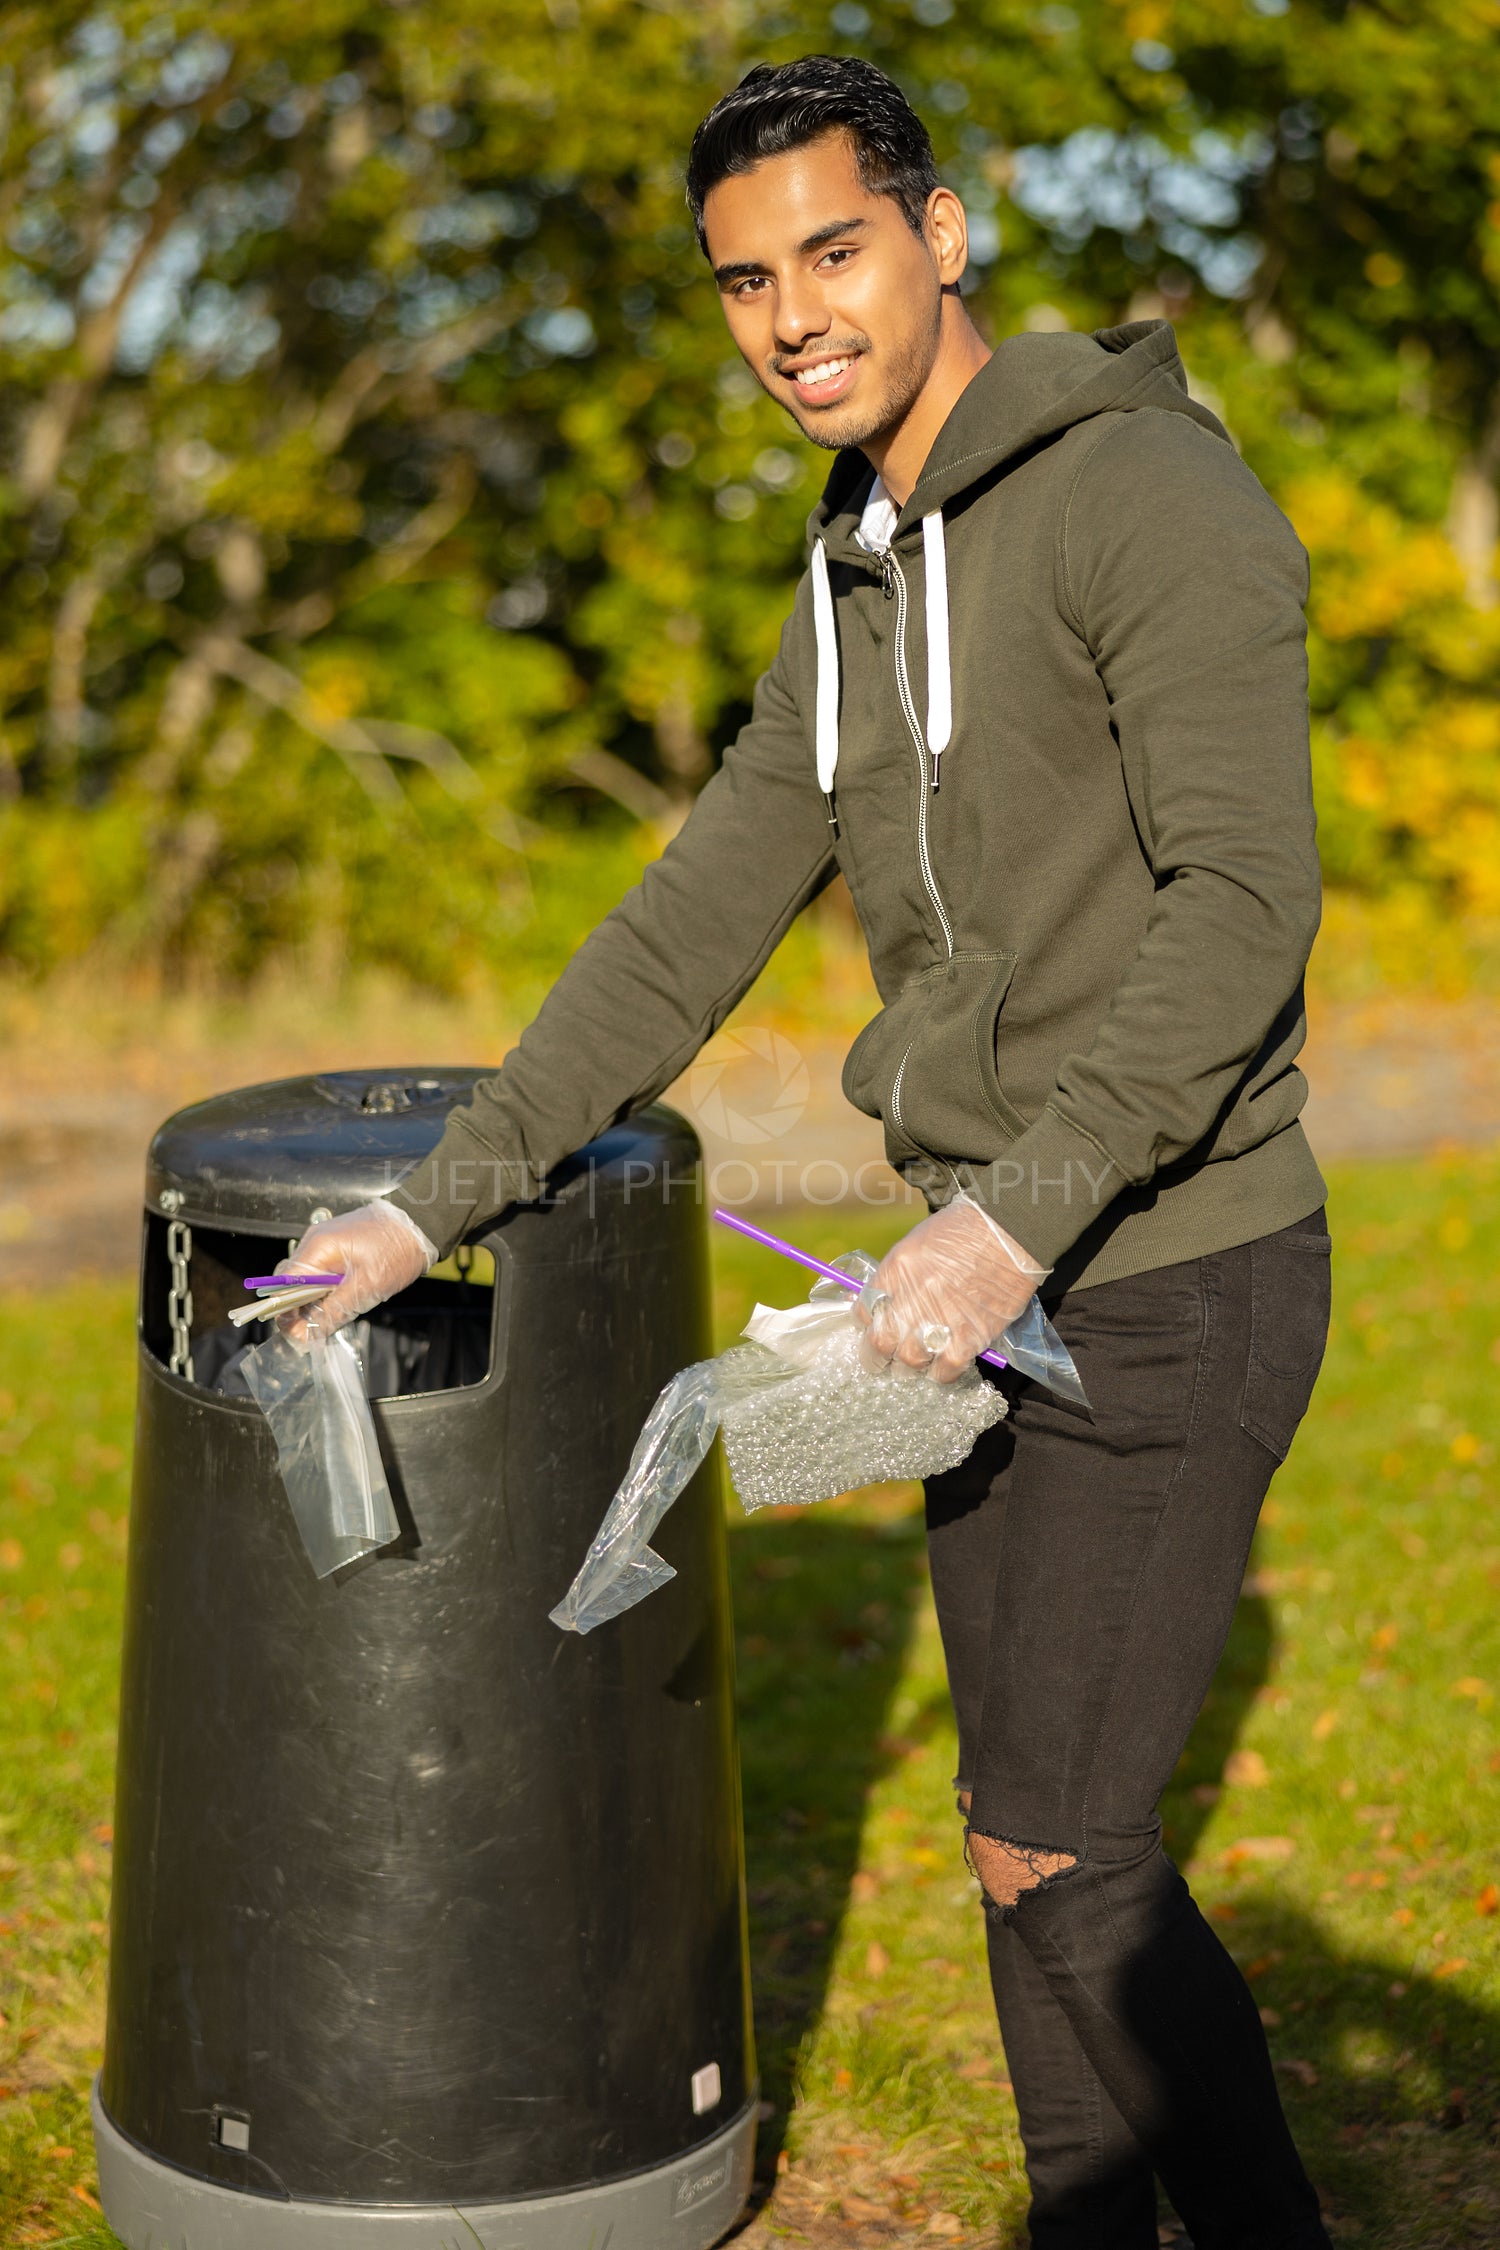 Smiling young man putting plastic in garbage bin at park